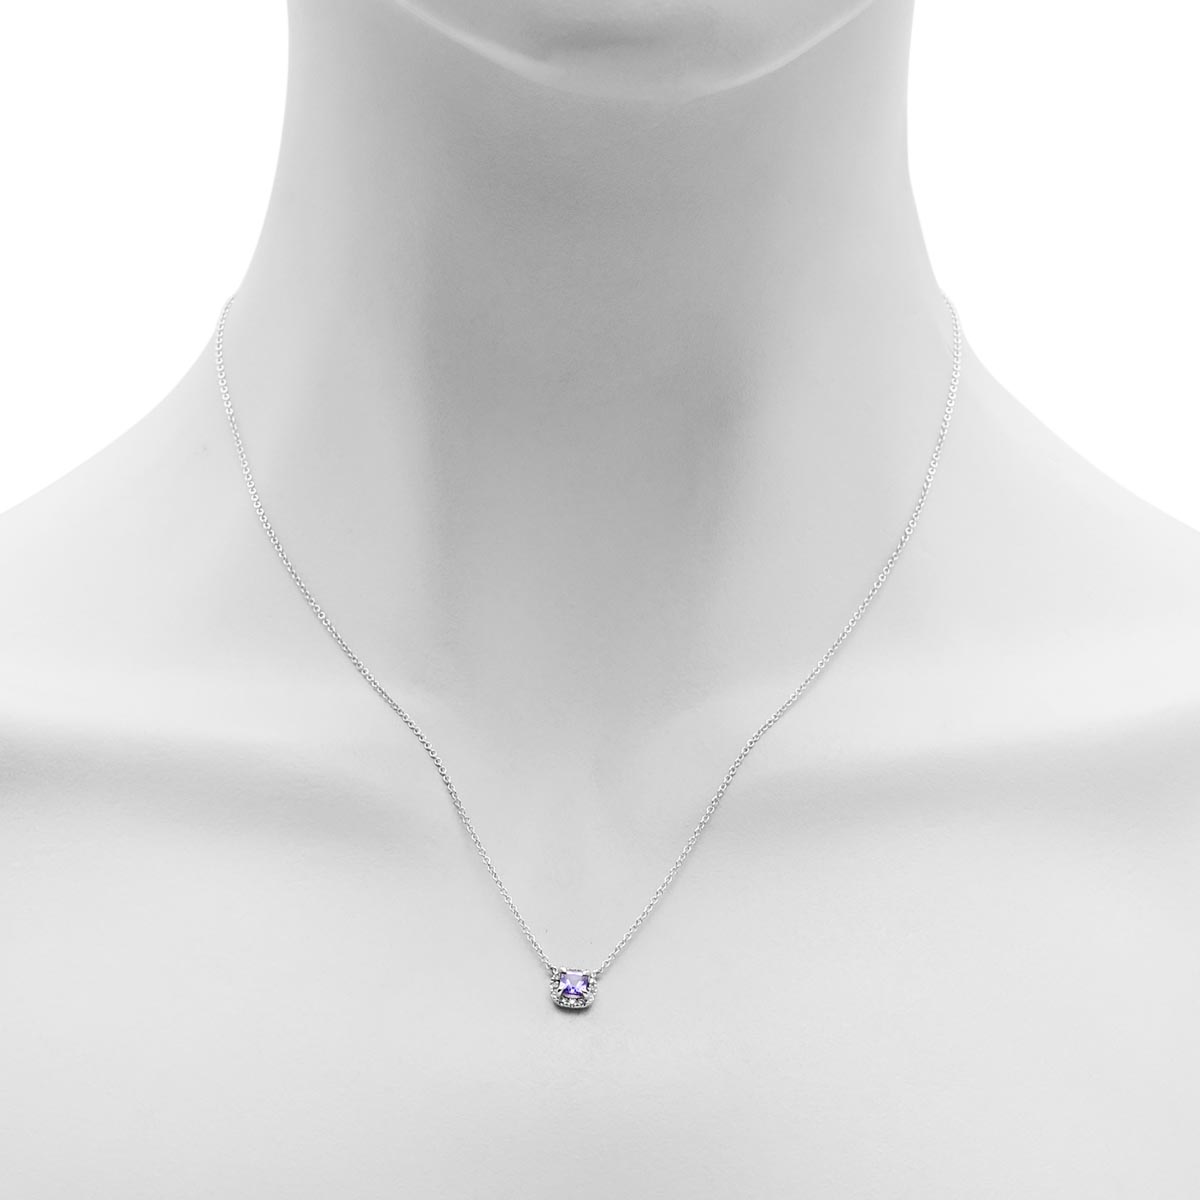 Tanzanite Halo Necklace in 14kt White Gold with Diamonds (1/20ct tw)